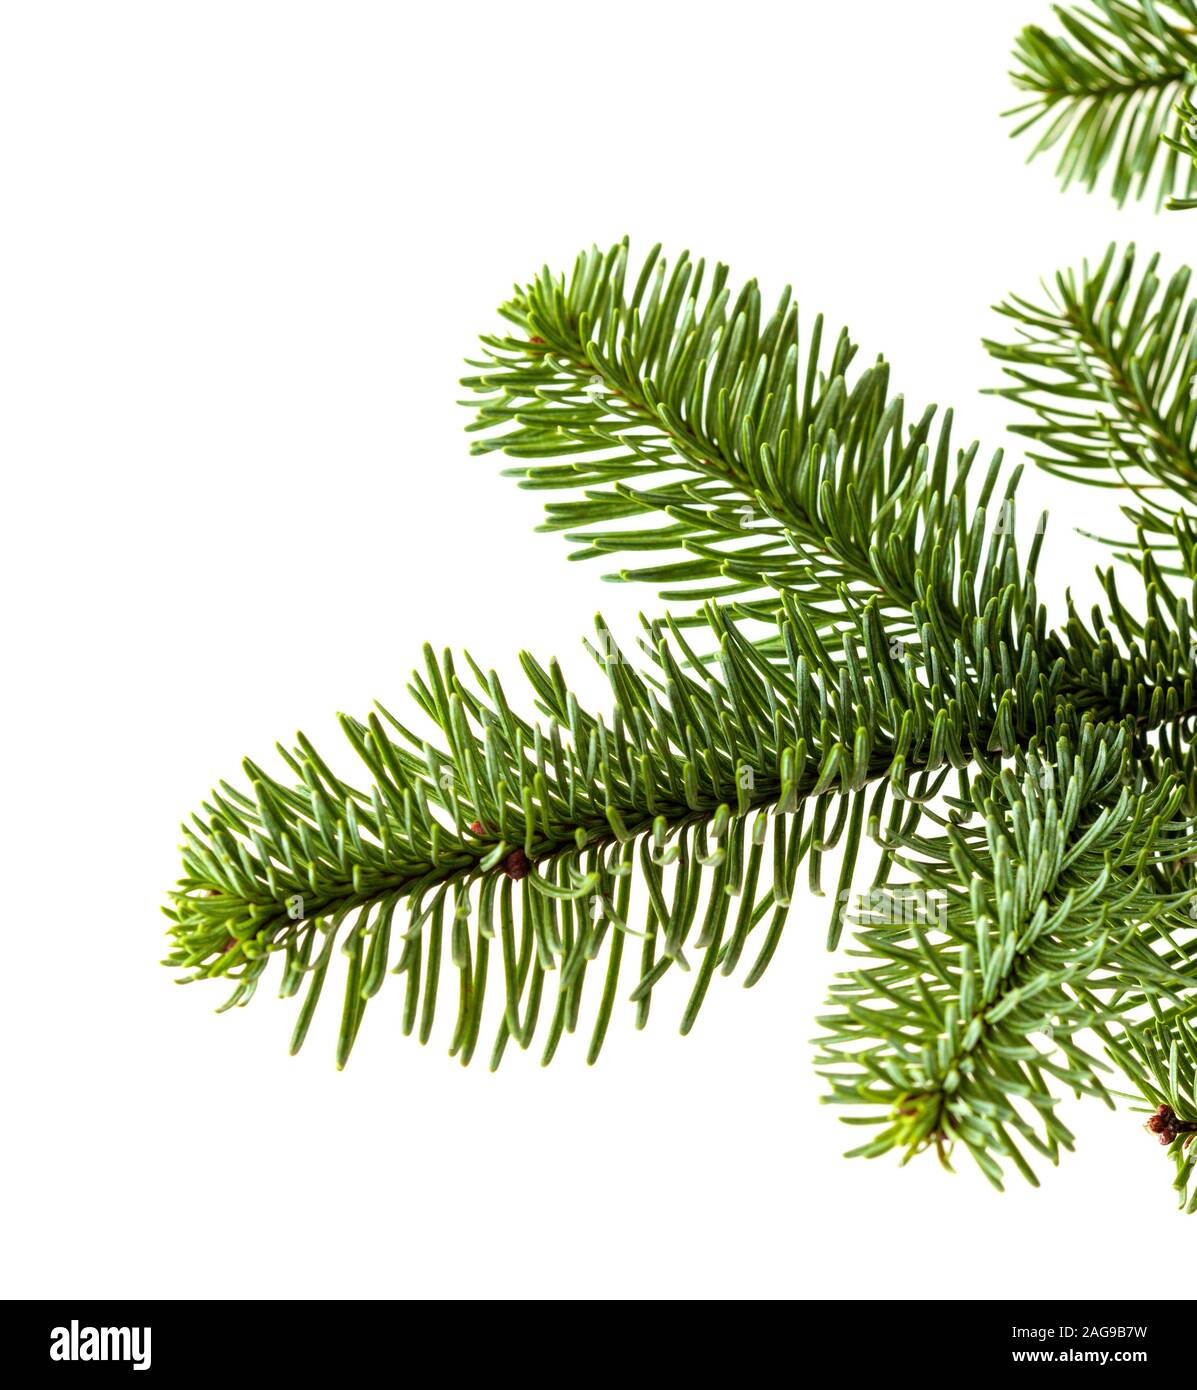 branch of noble fir, Abies procera, isolated on white background Stock Photo